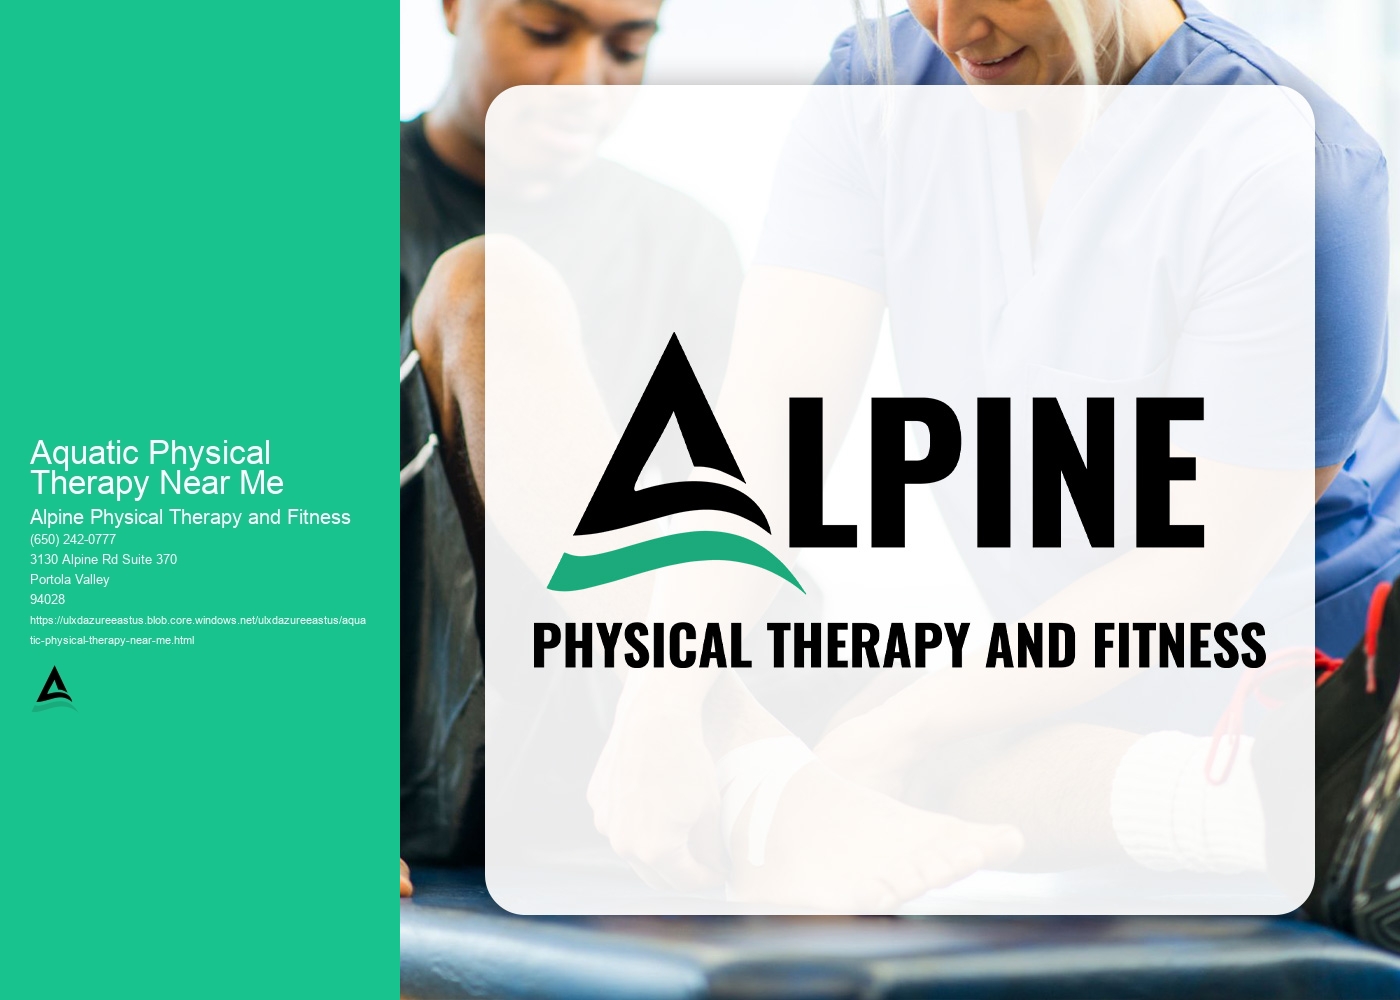 What evidence-based research supports the efficacy of aquatic physical therapy in improving balance, coordination, and gait for elderly patients with age-related mobility issues?